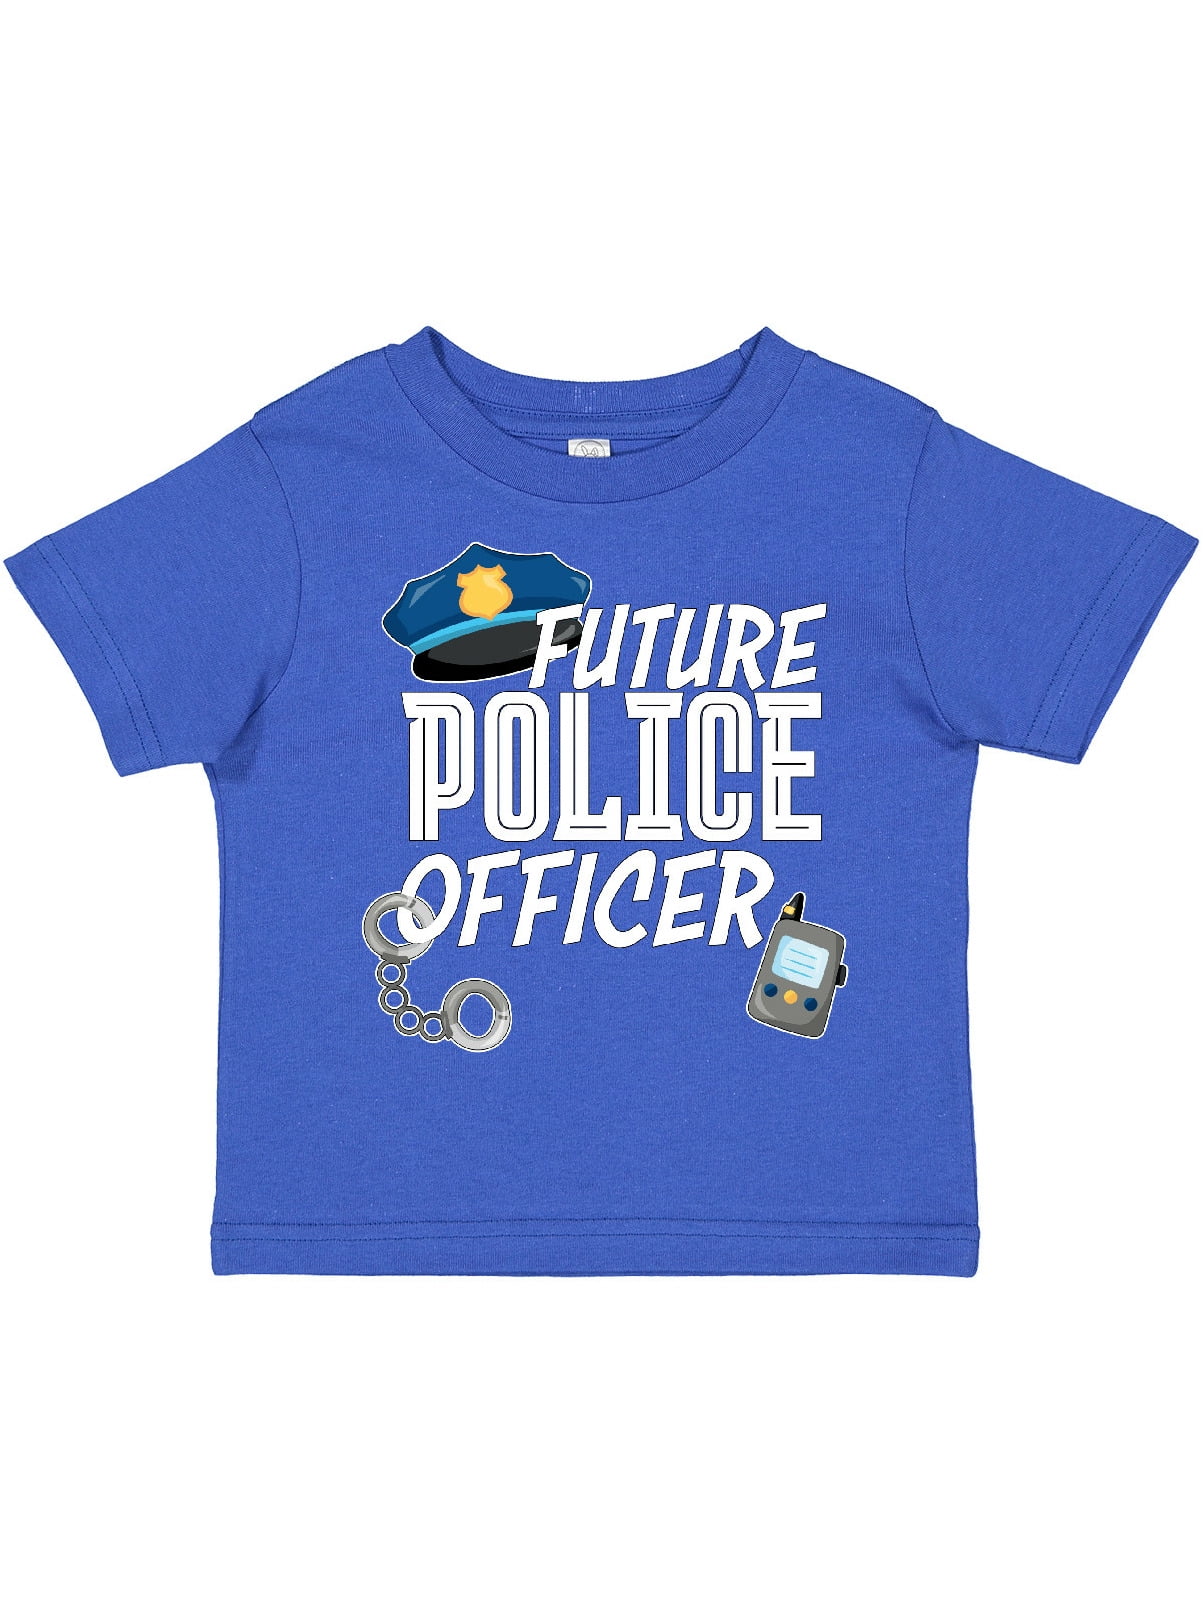 Societee Future Police Officer Cool Cute Girls Boys Toddler Long Sleeve T-Shirt